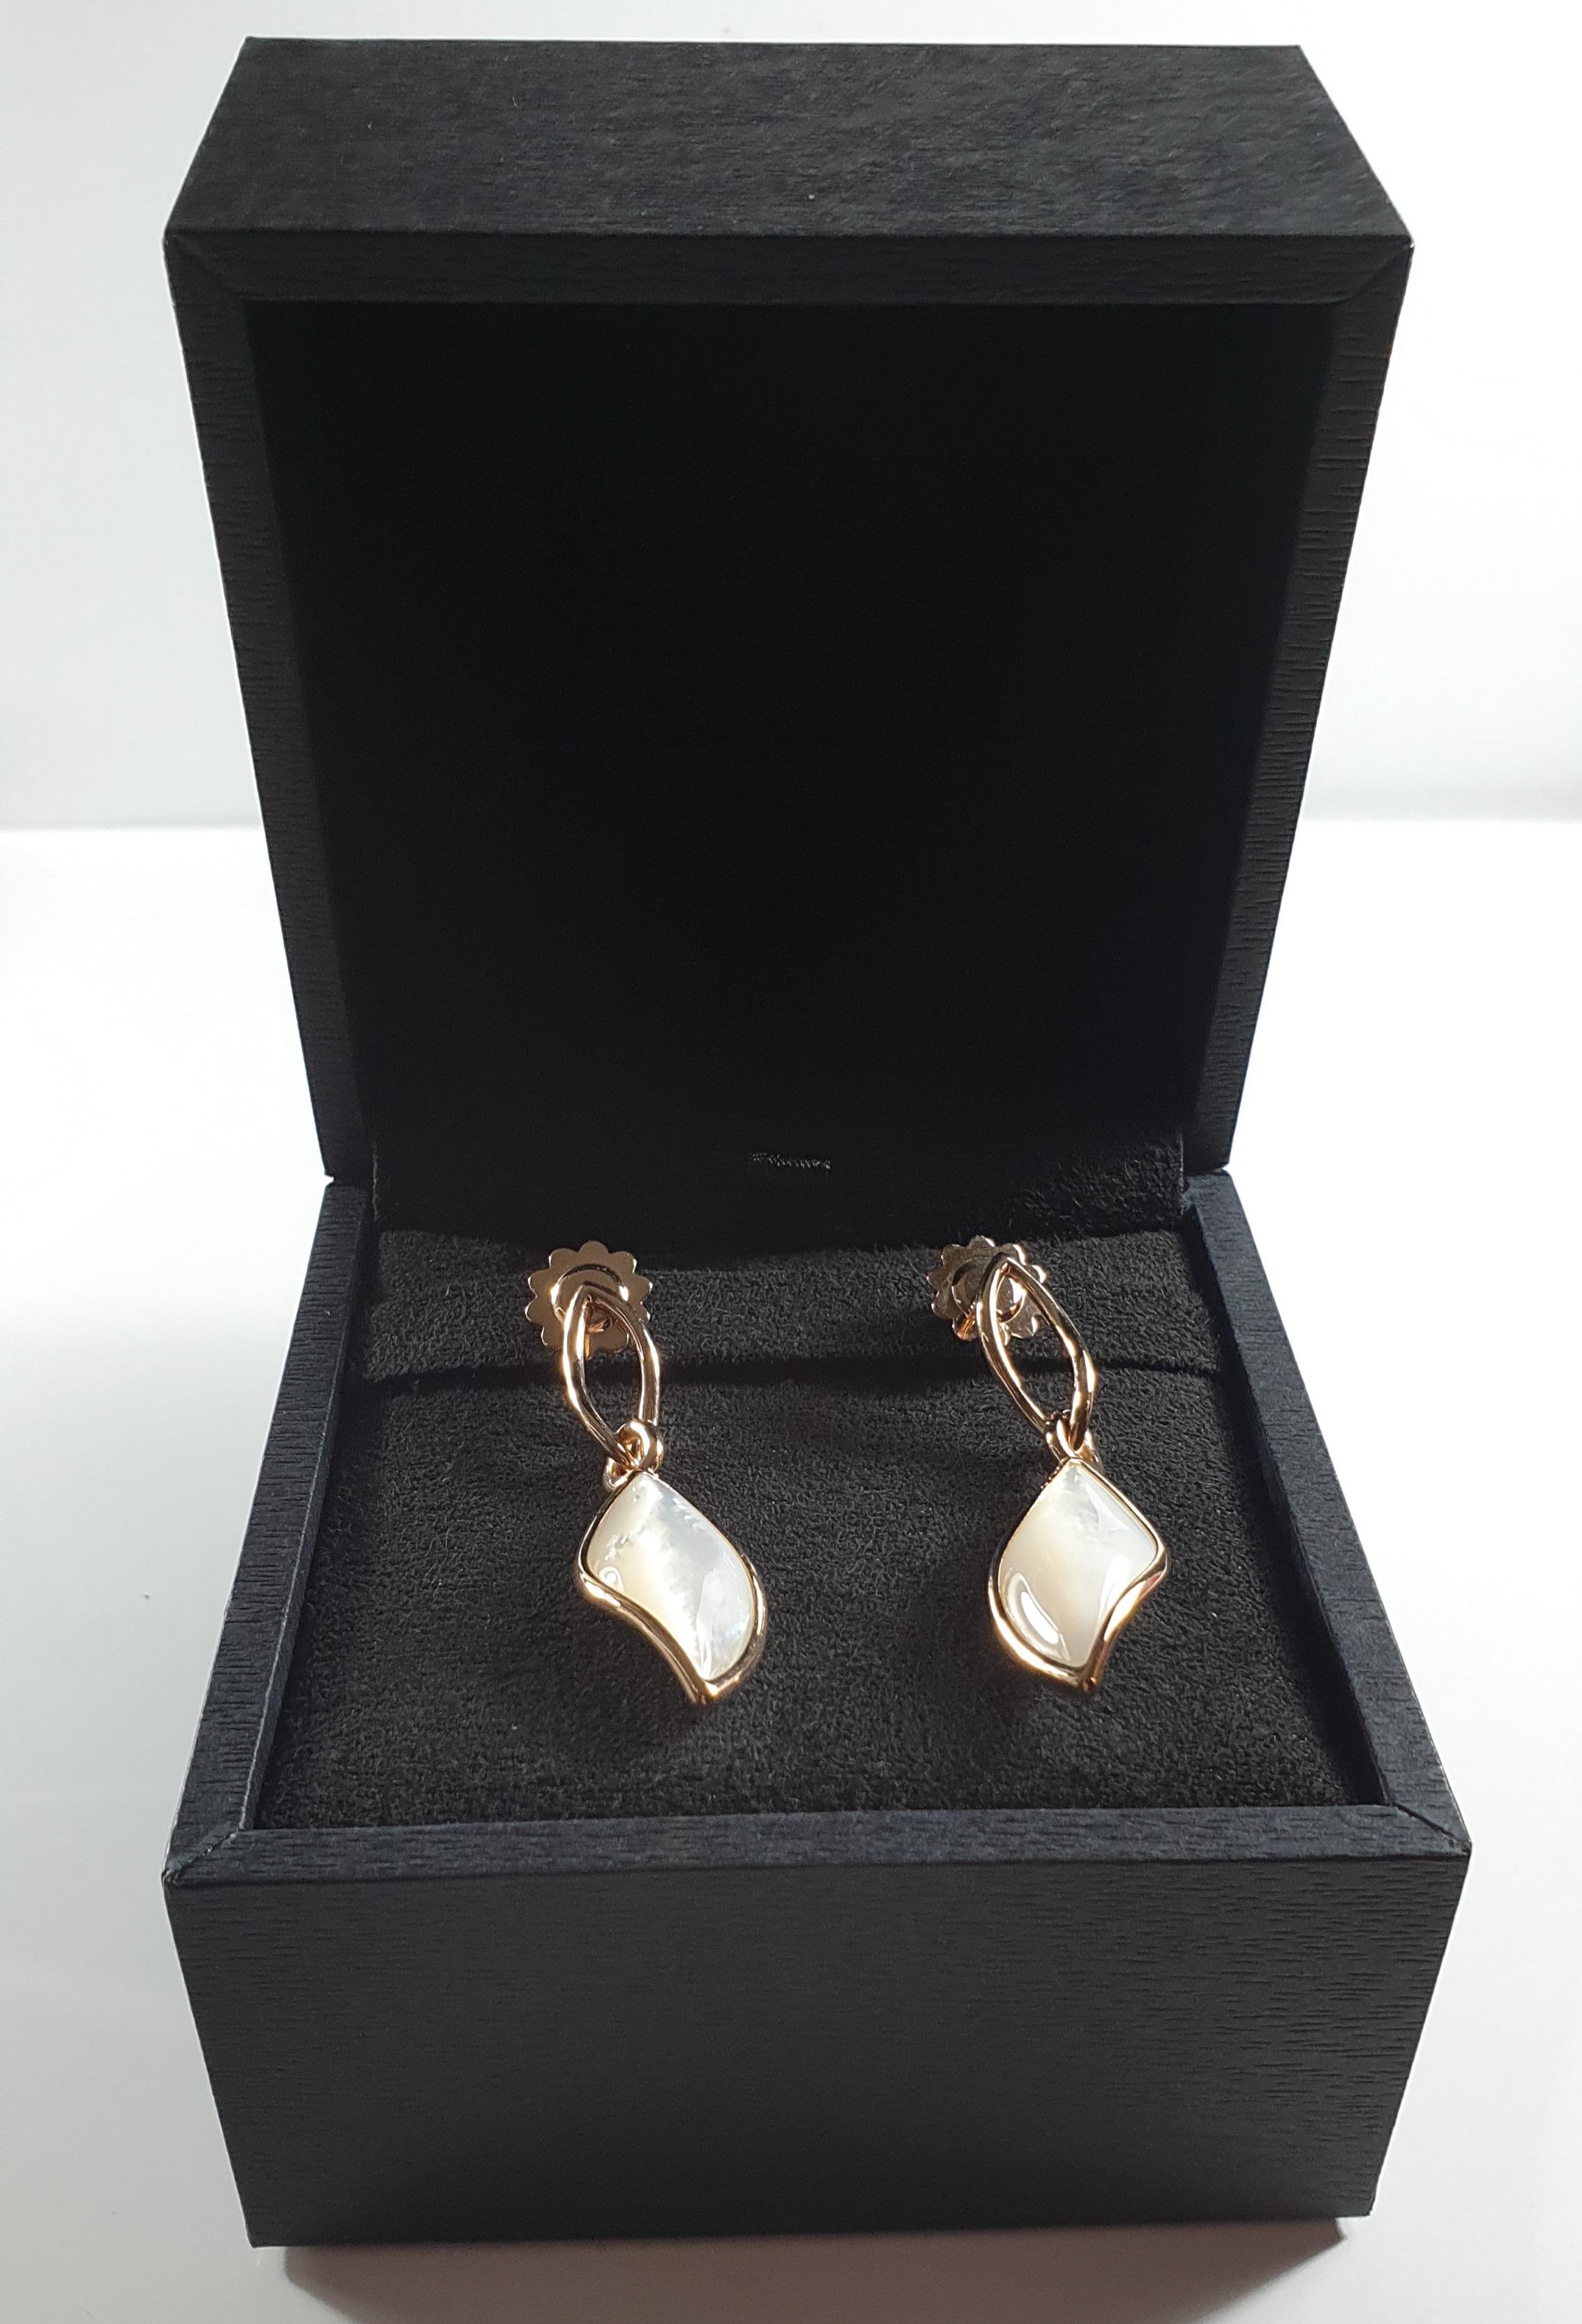 Mattioli Navettes Earrings in 18 K Rose Gold and Mother of Pearl For Sale 1